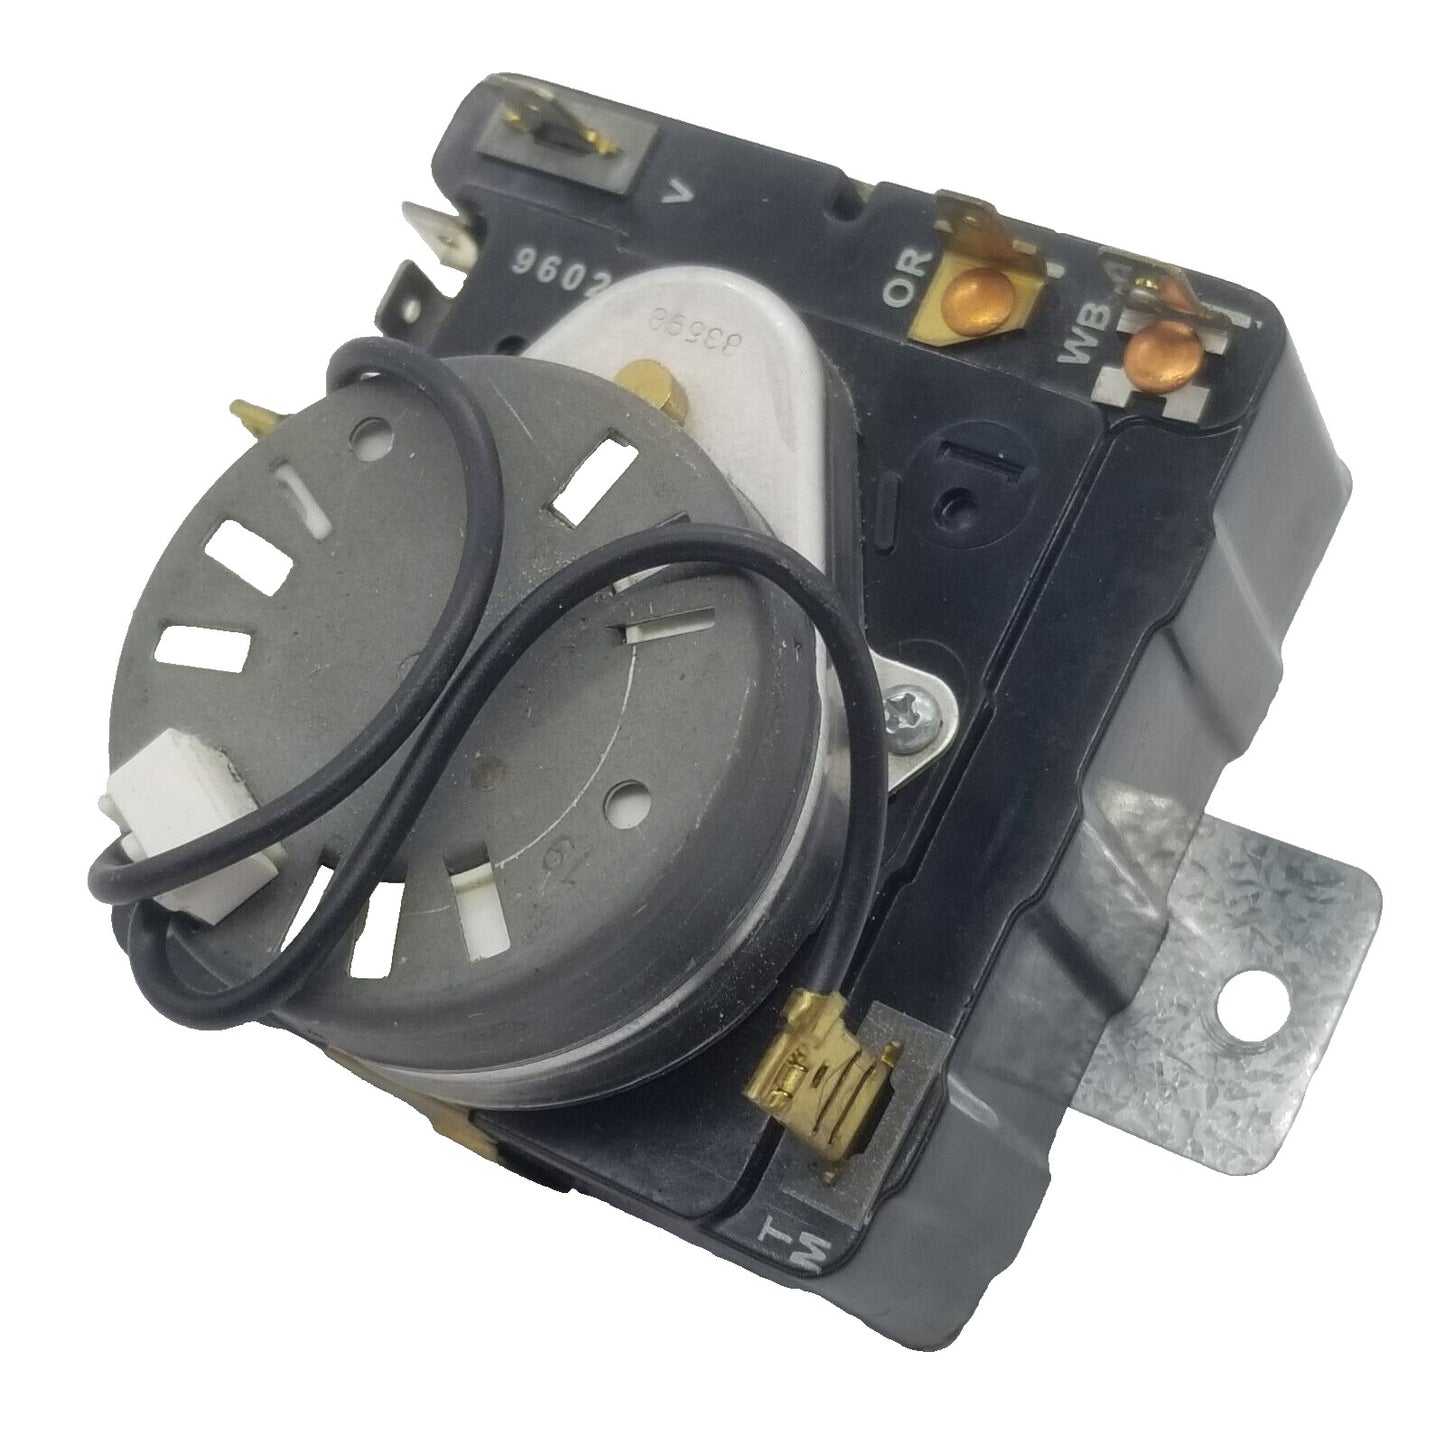 OEM Replacement for Whirlpool Dryer Timer 3406714